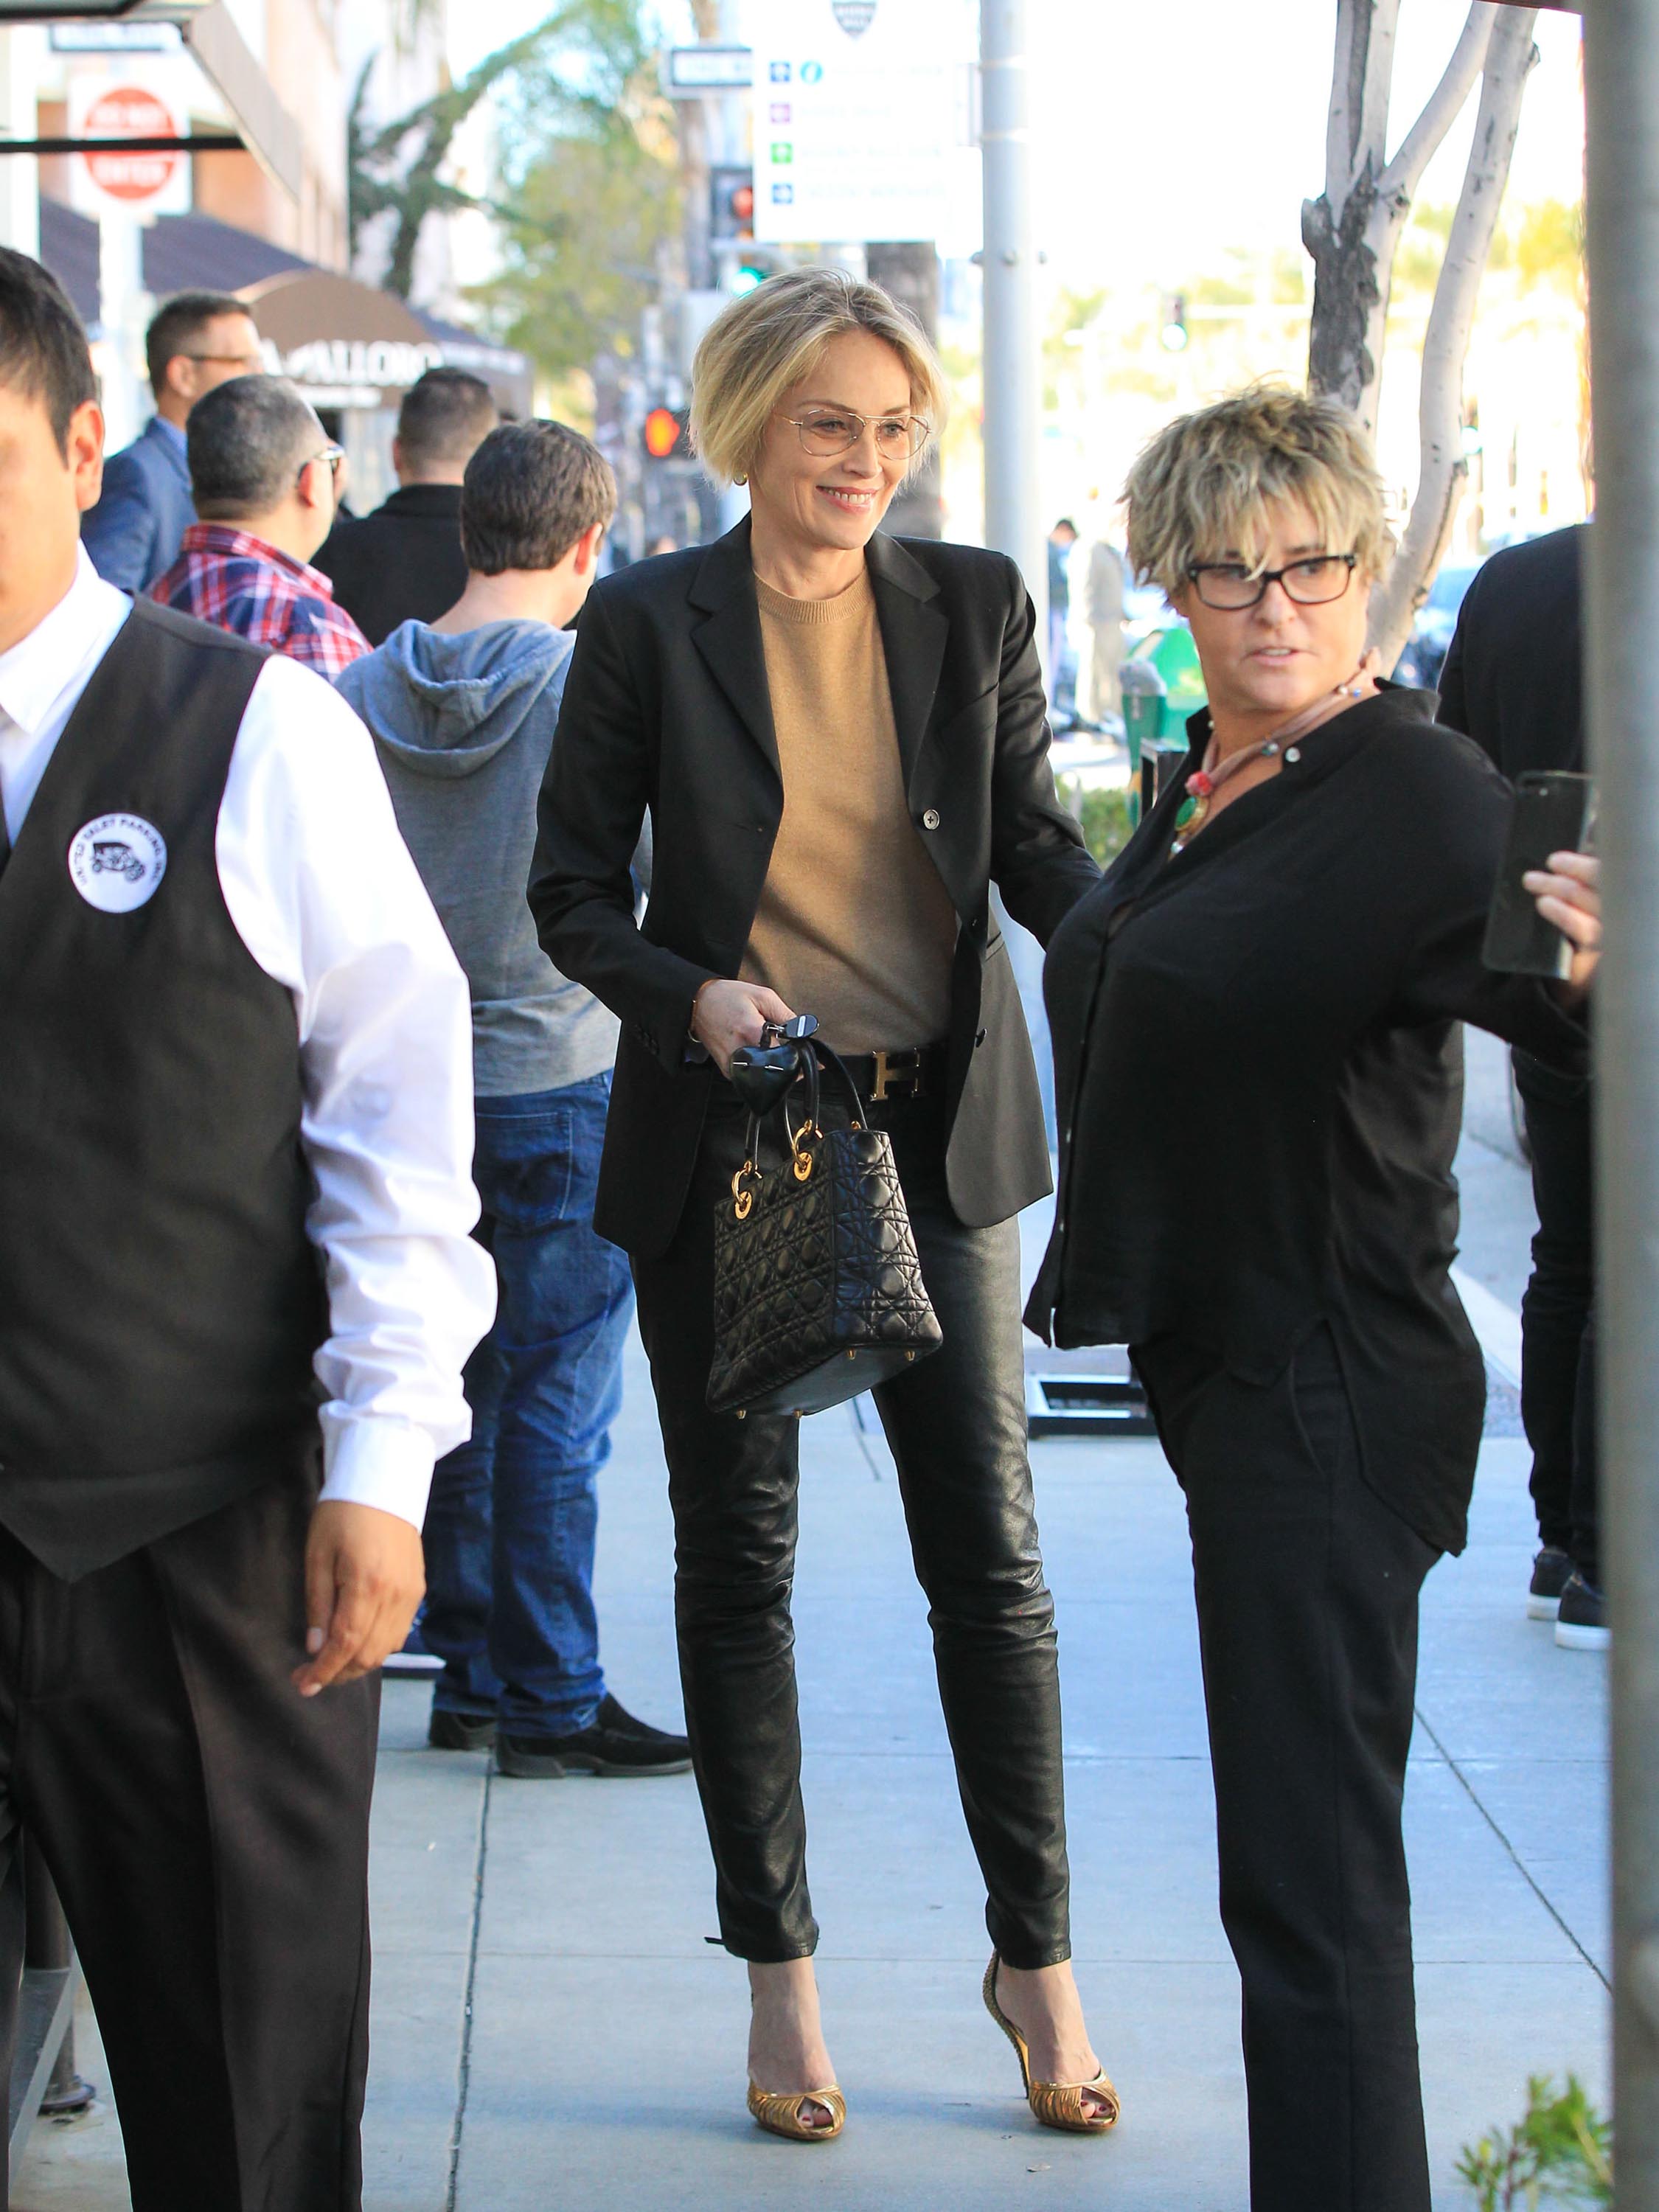 Sharon Stone is seen in Los Angeles